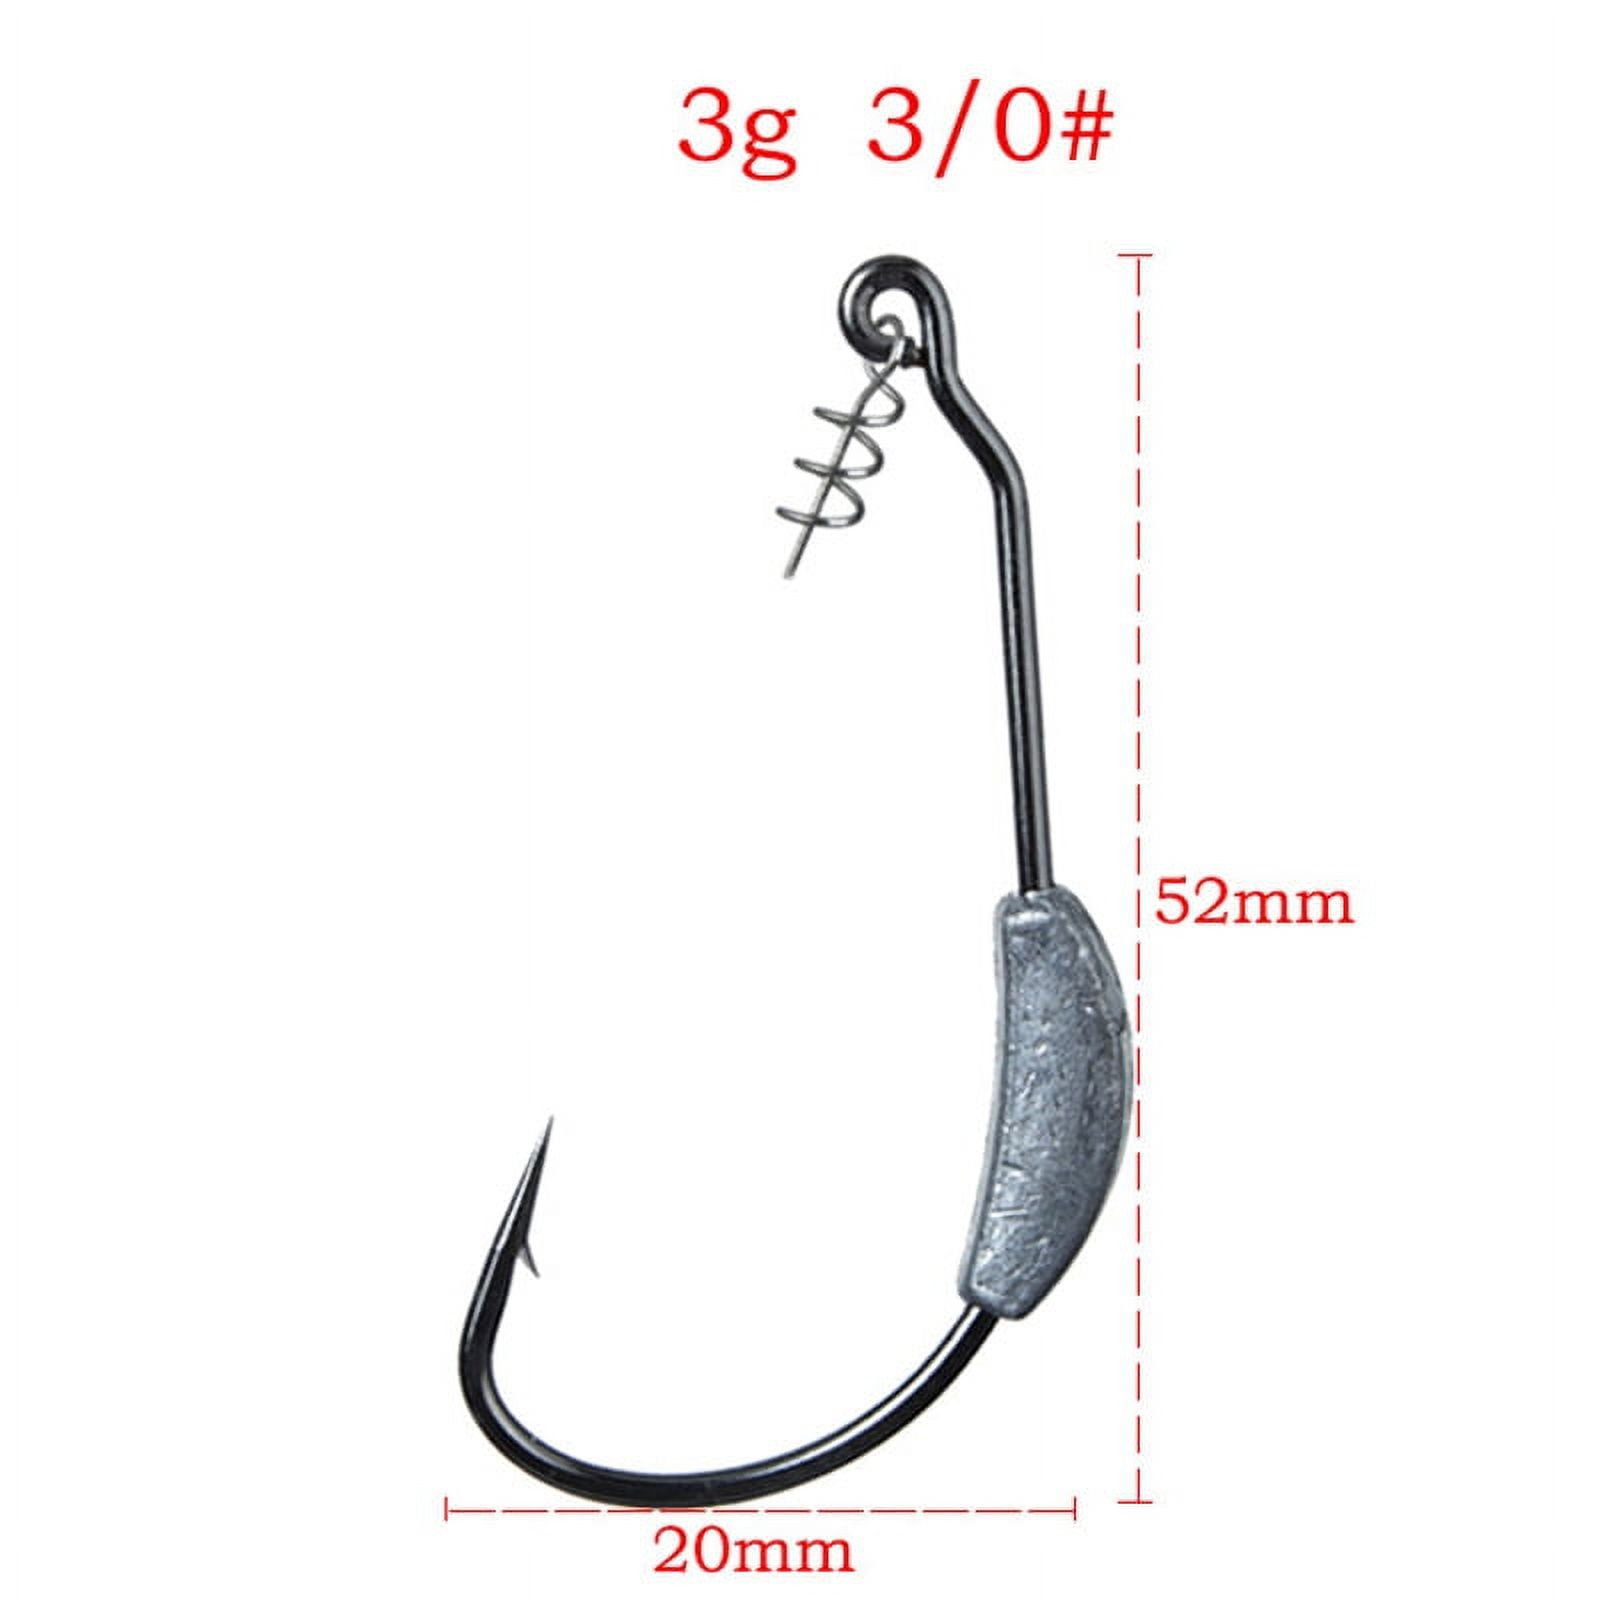 weighted jig hooks, weighted jig hooks Suppliers and Manufacturers at